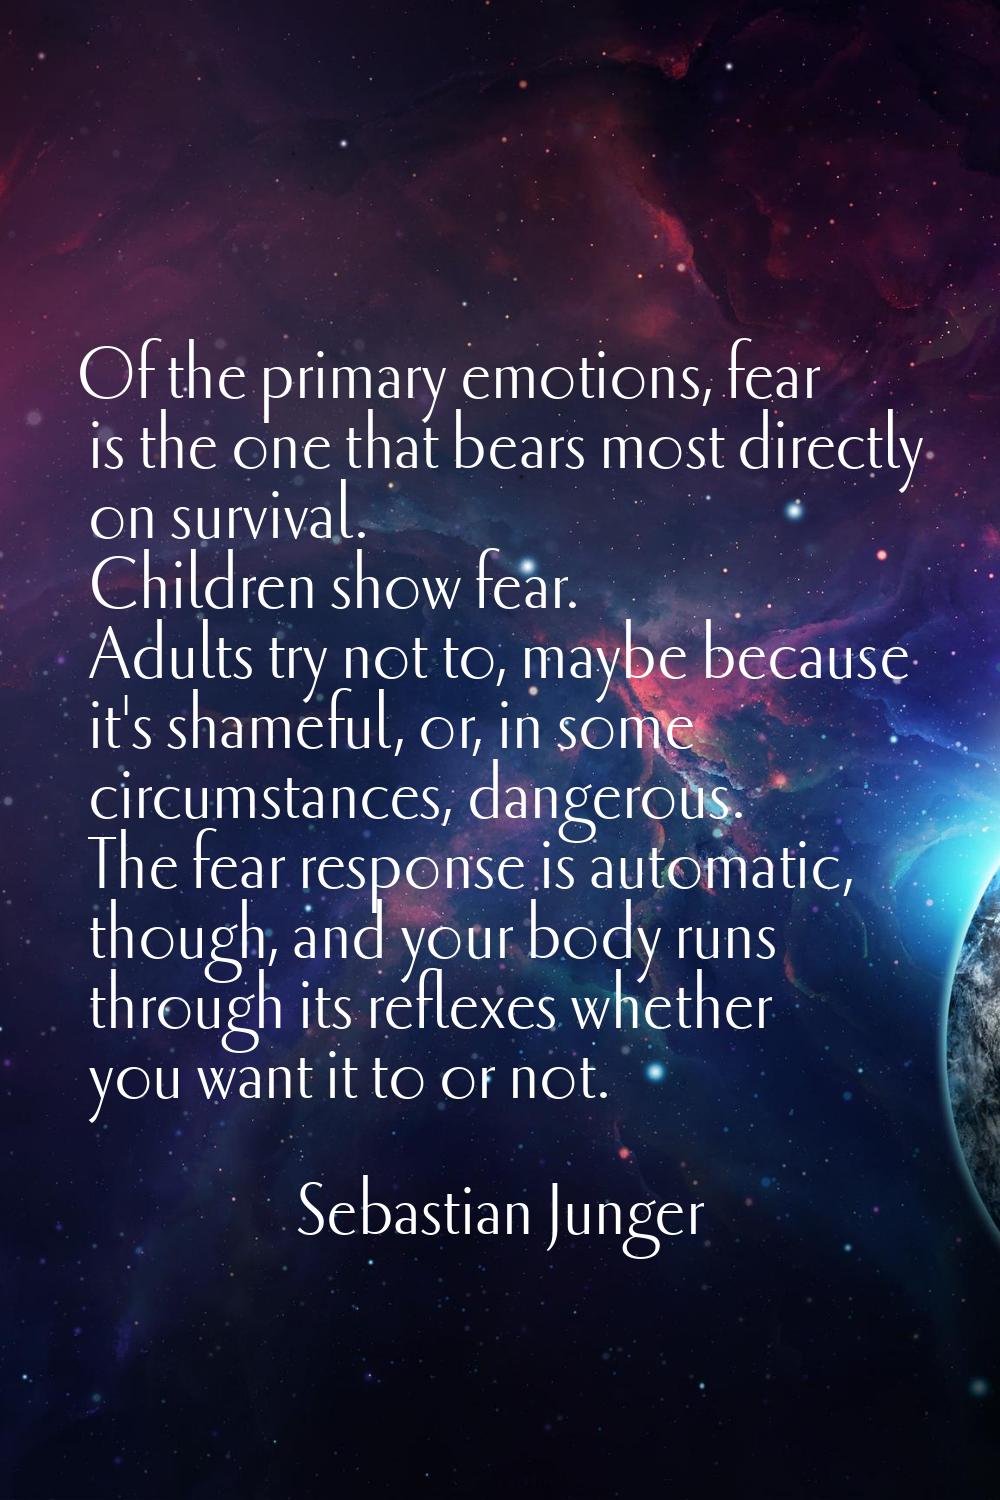 Of the primary emotions, fear is the one that bears most directly on survival. Children show fear. 